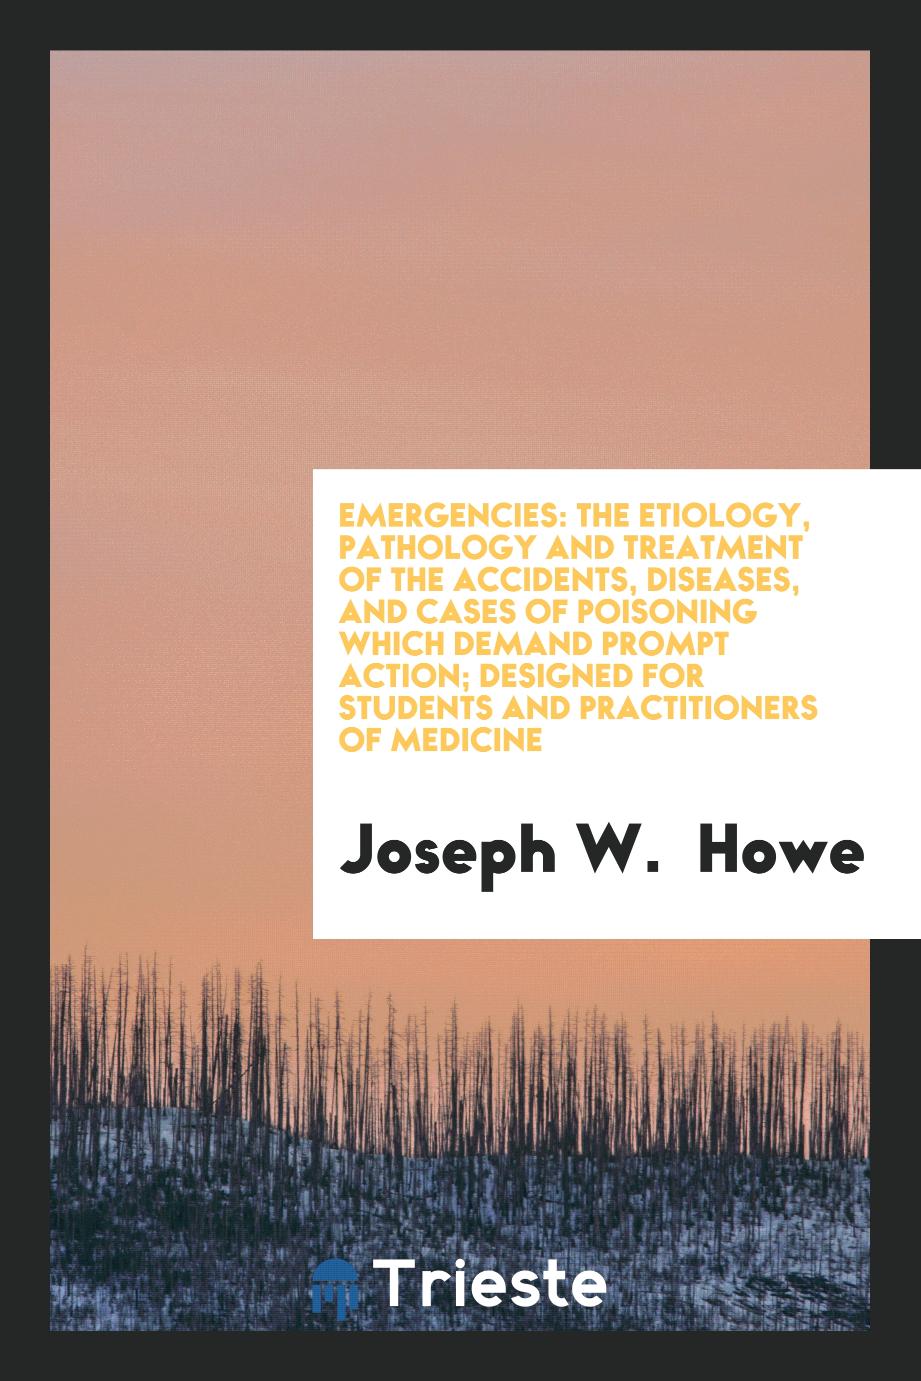 Emergencies: The Etiology, Pathology and Treatment of the Accidents, Diseases, and Cases of Poisoning Which Demand Prompt Action; Designed for Students and Practitioners of Medicine